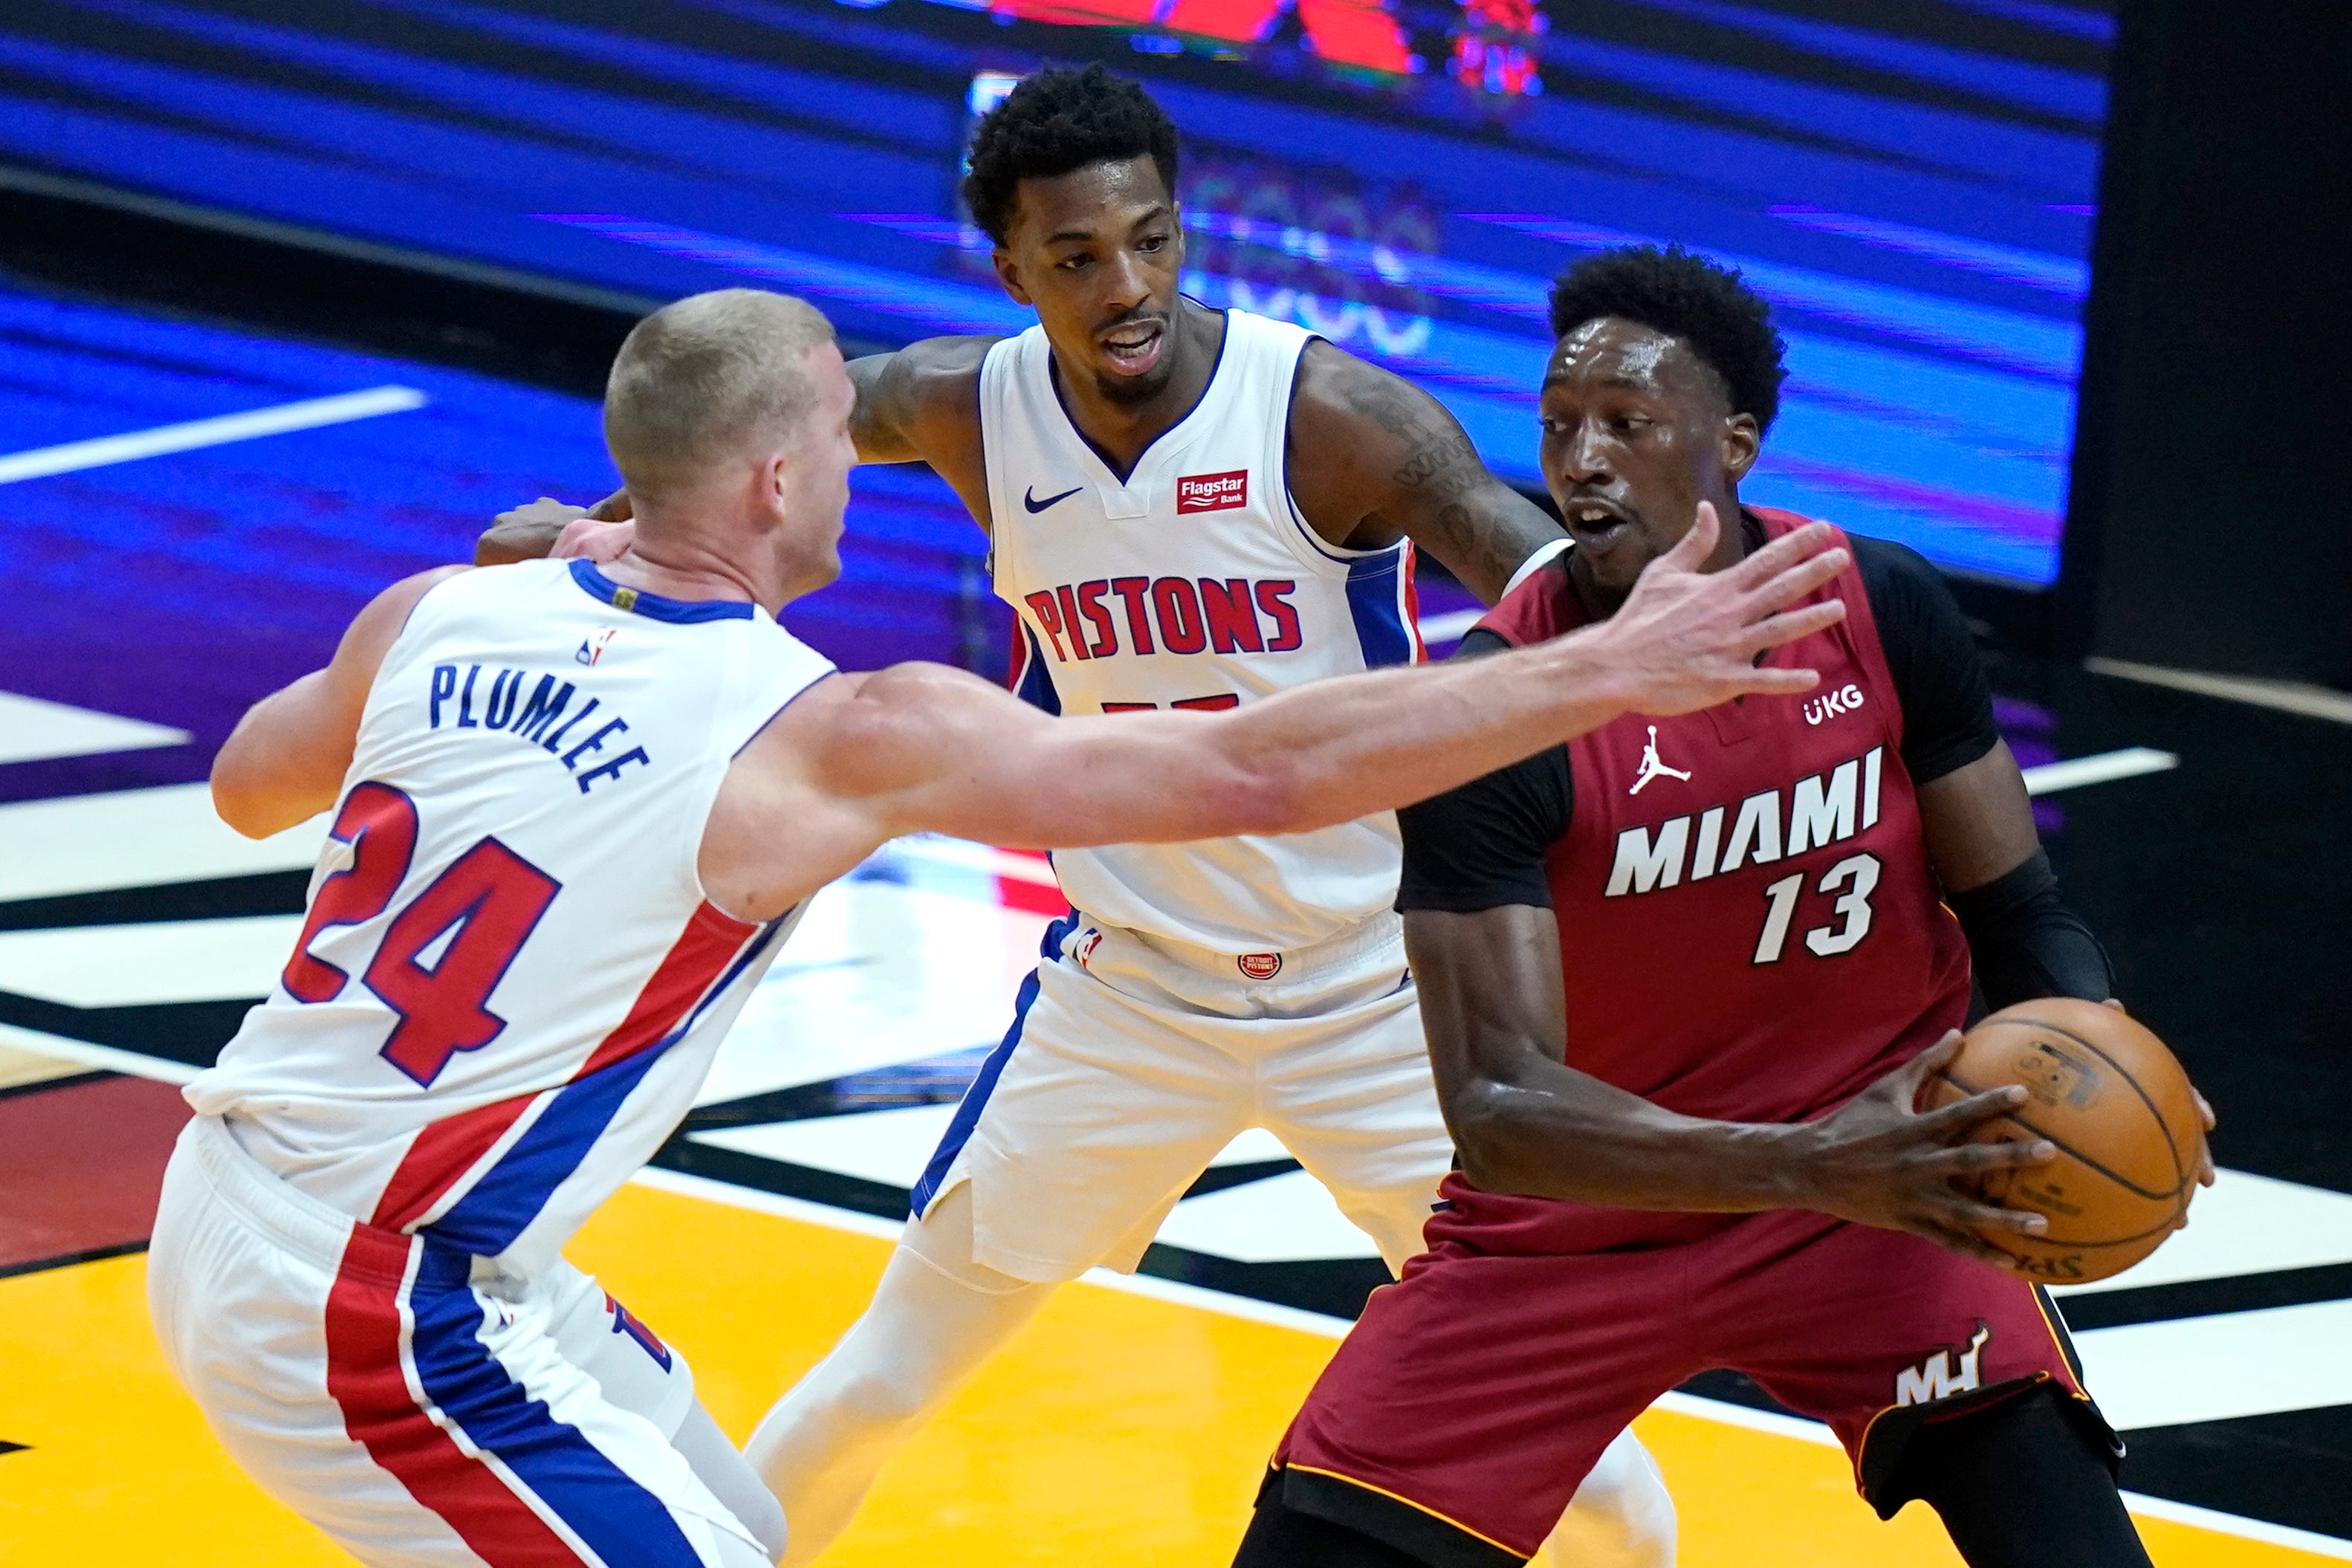 Detroit Pistons center Mason Plumlee (24) defends against Miami Heat center Bam Adebayo (13) during the first half of an NBA basketball game, Saturday, Jan. 16, 2021, in Miami.